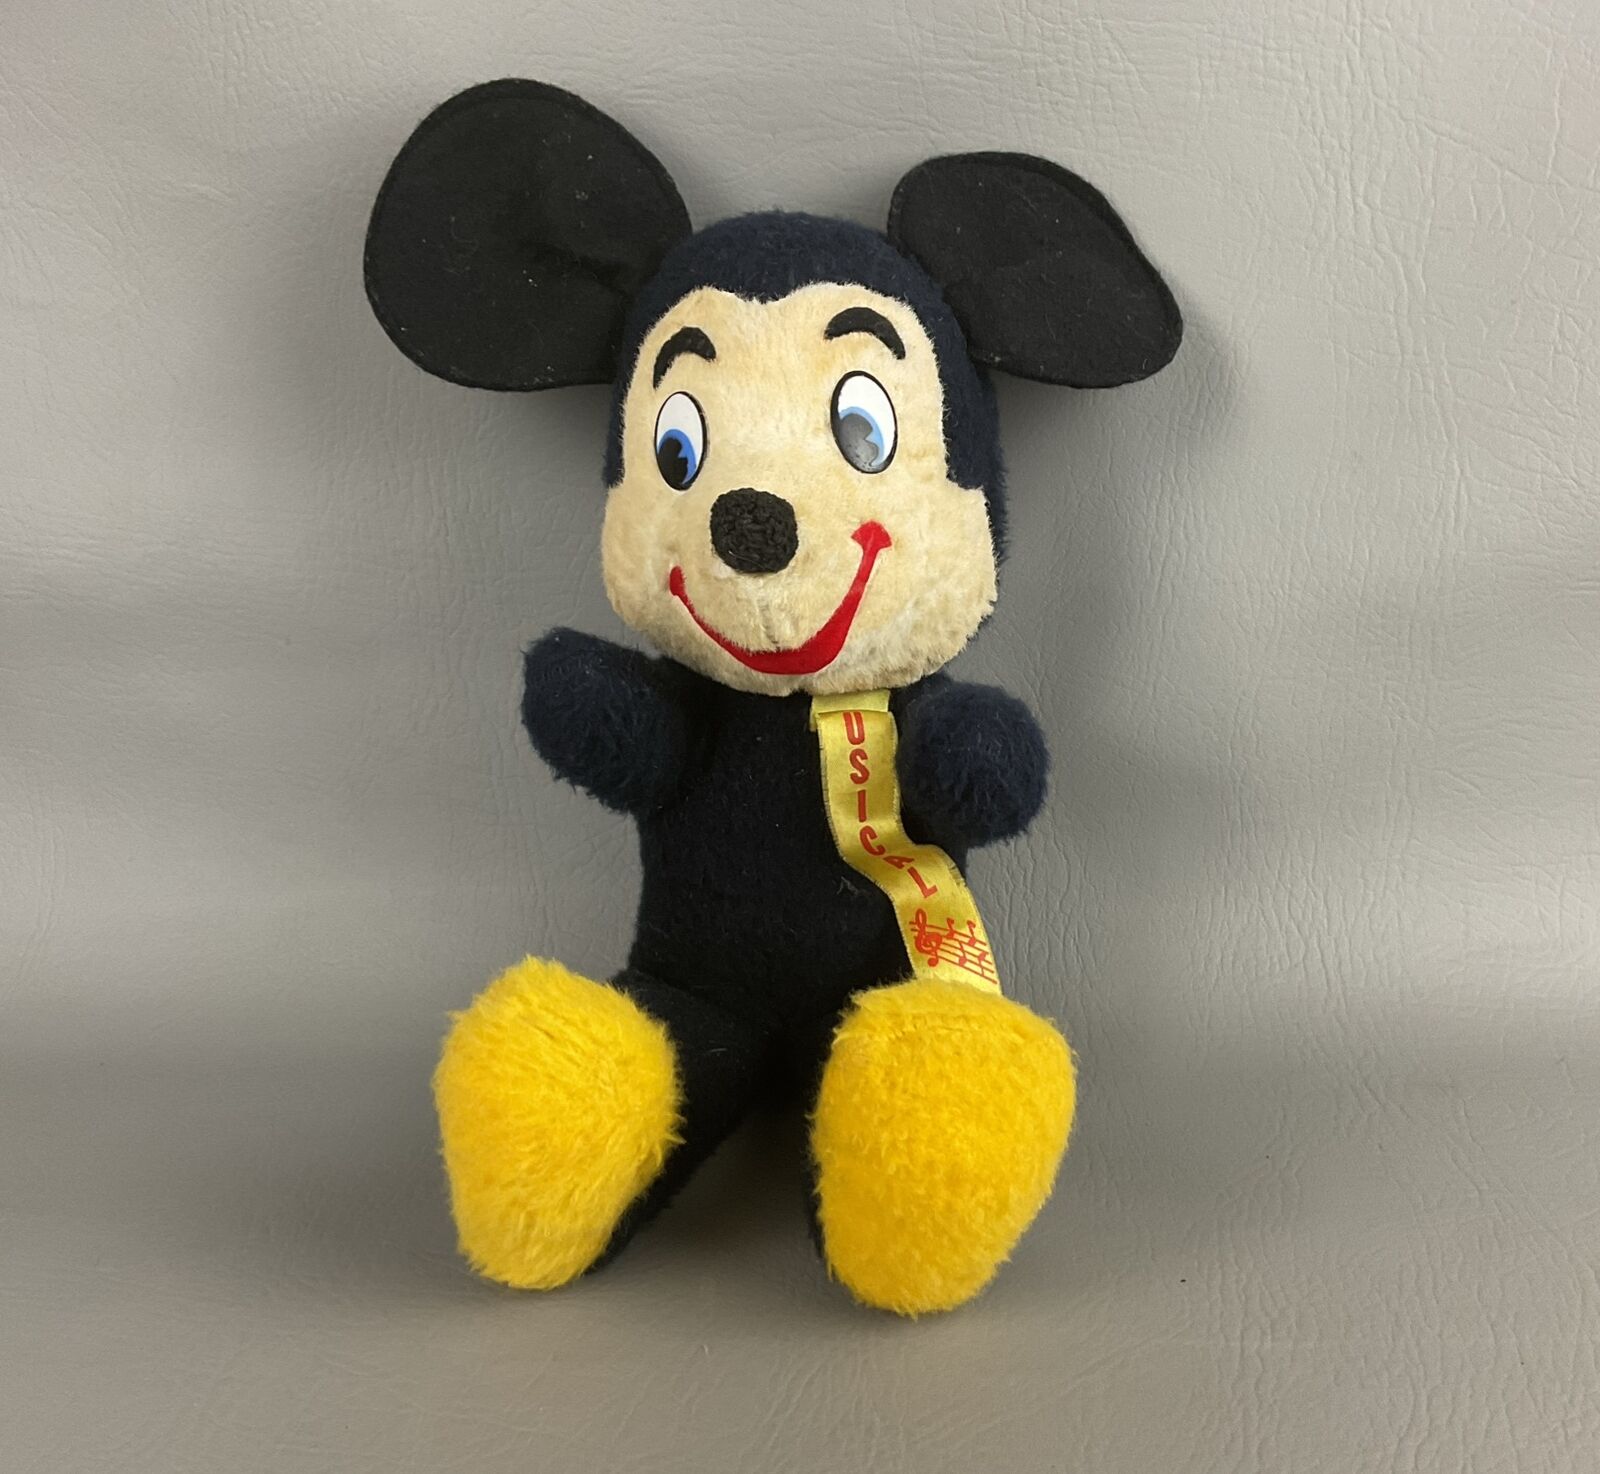 Antique Mickey Mouse Plush Doll with Music Box Vintage Disney 1950’s